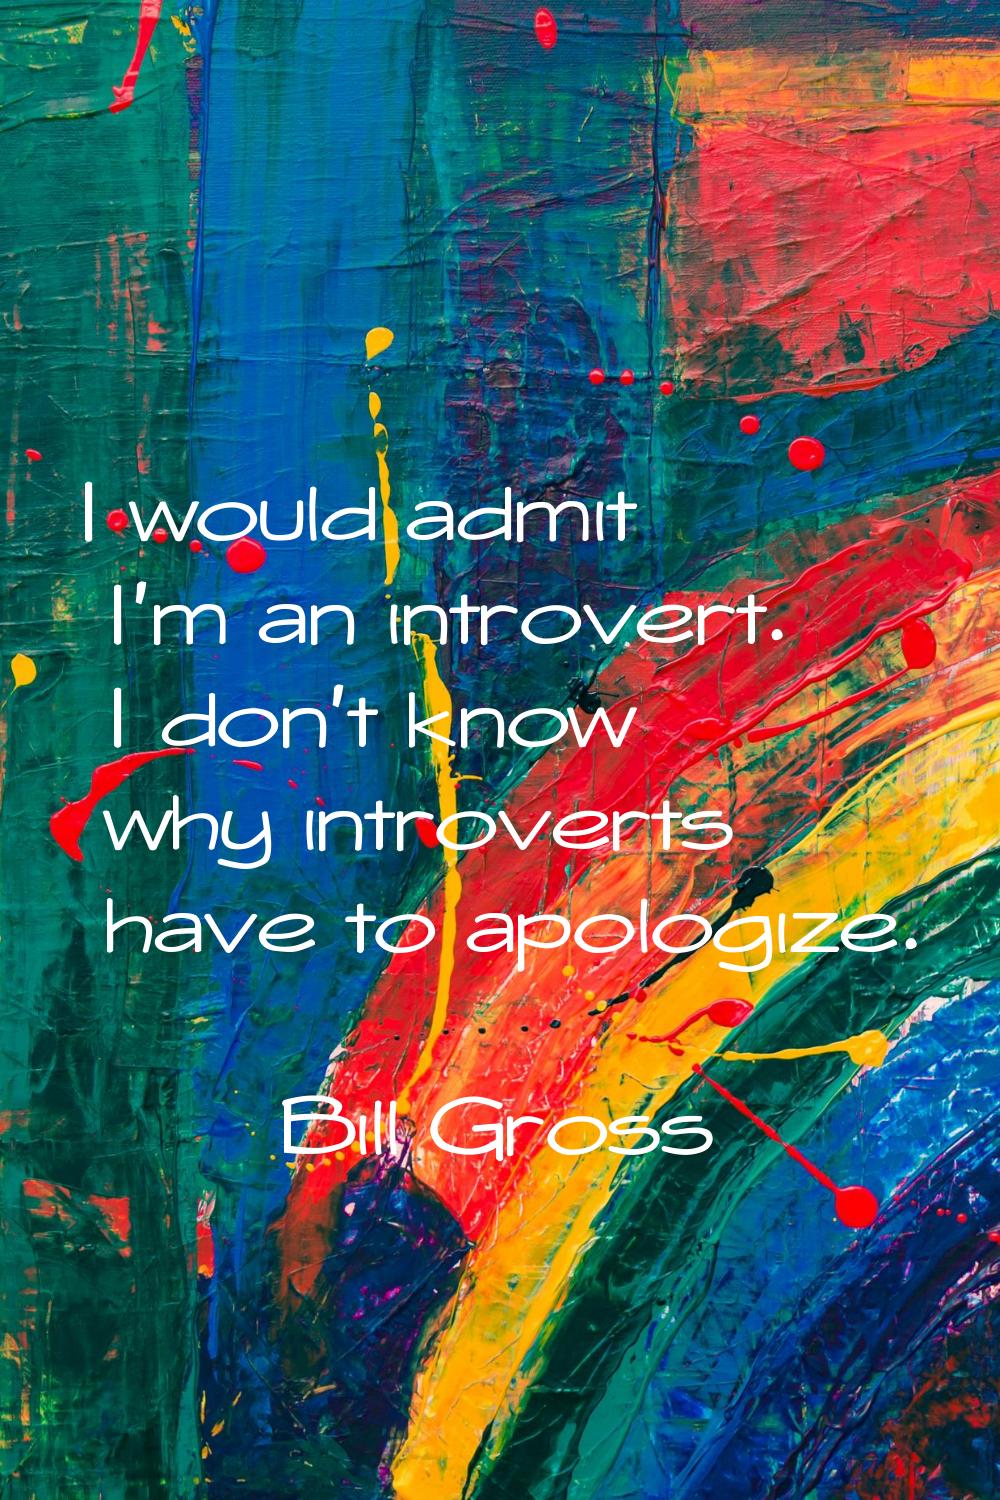 I would admit I'm an introvert. I don't know why introverts have to apologize.